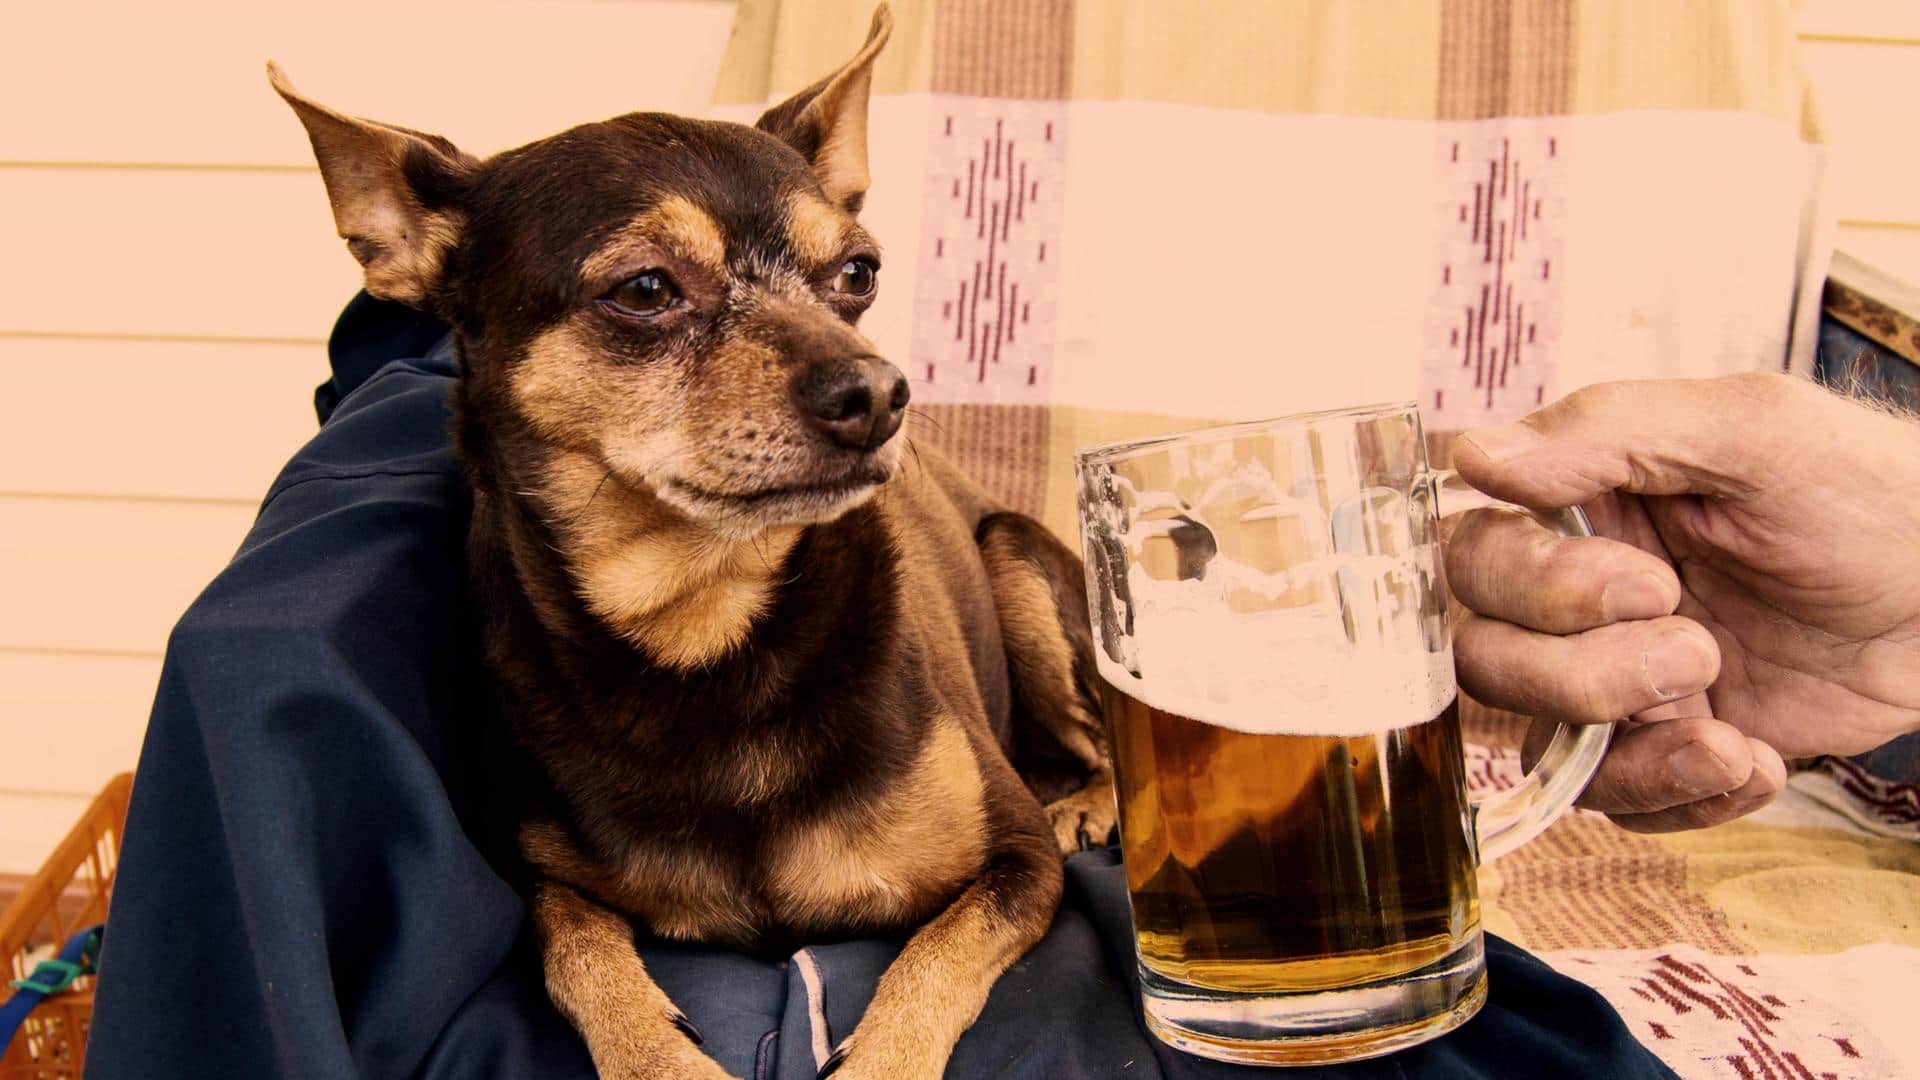 Can your dog become an alcoholic? Possibly.